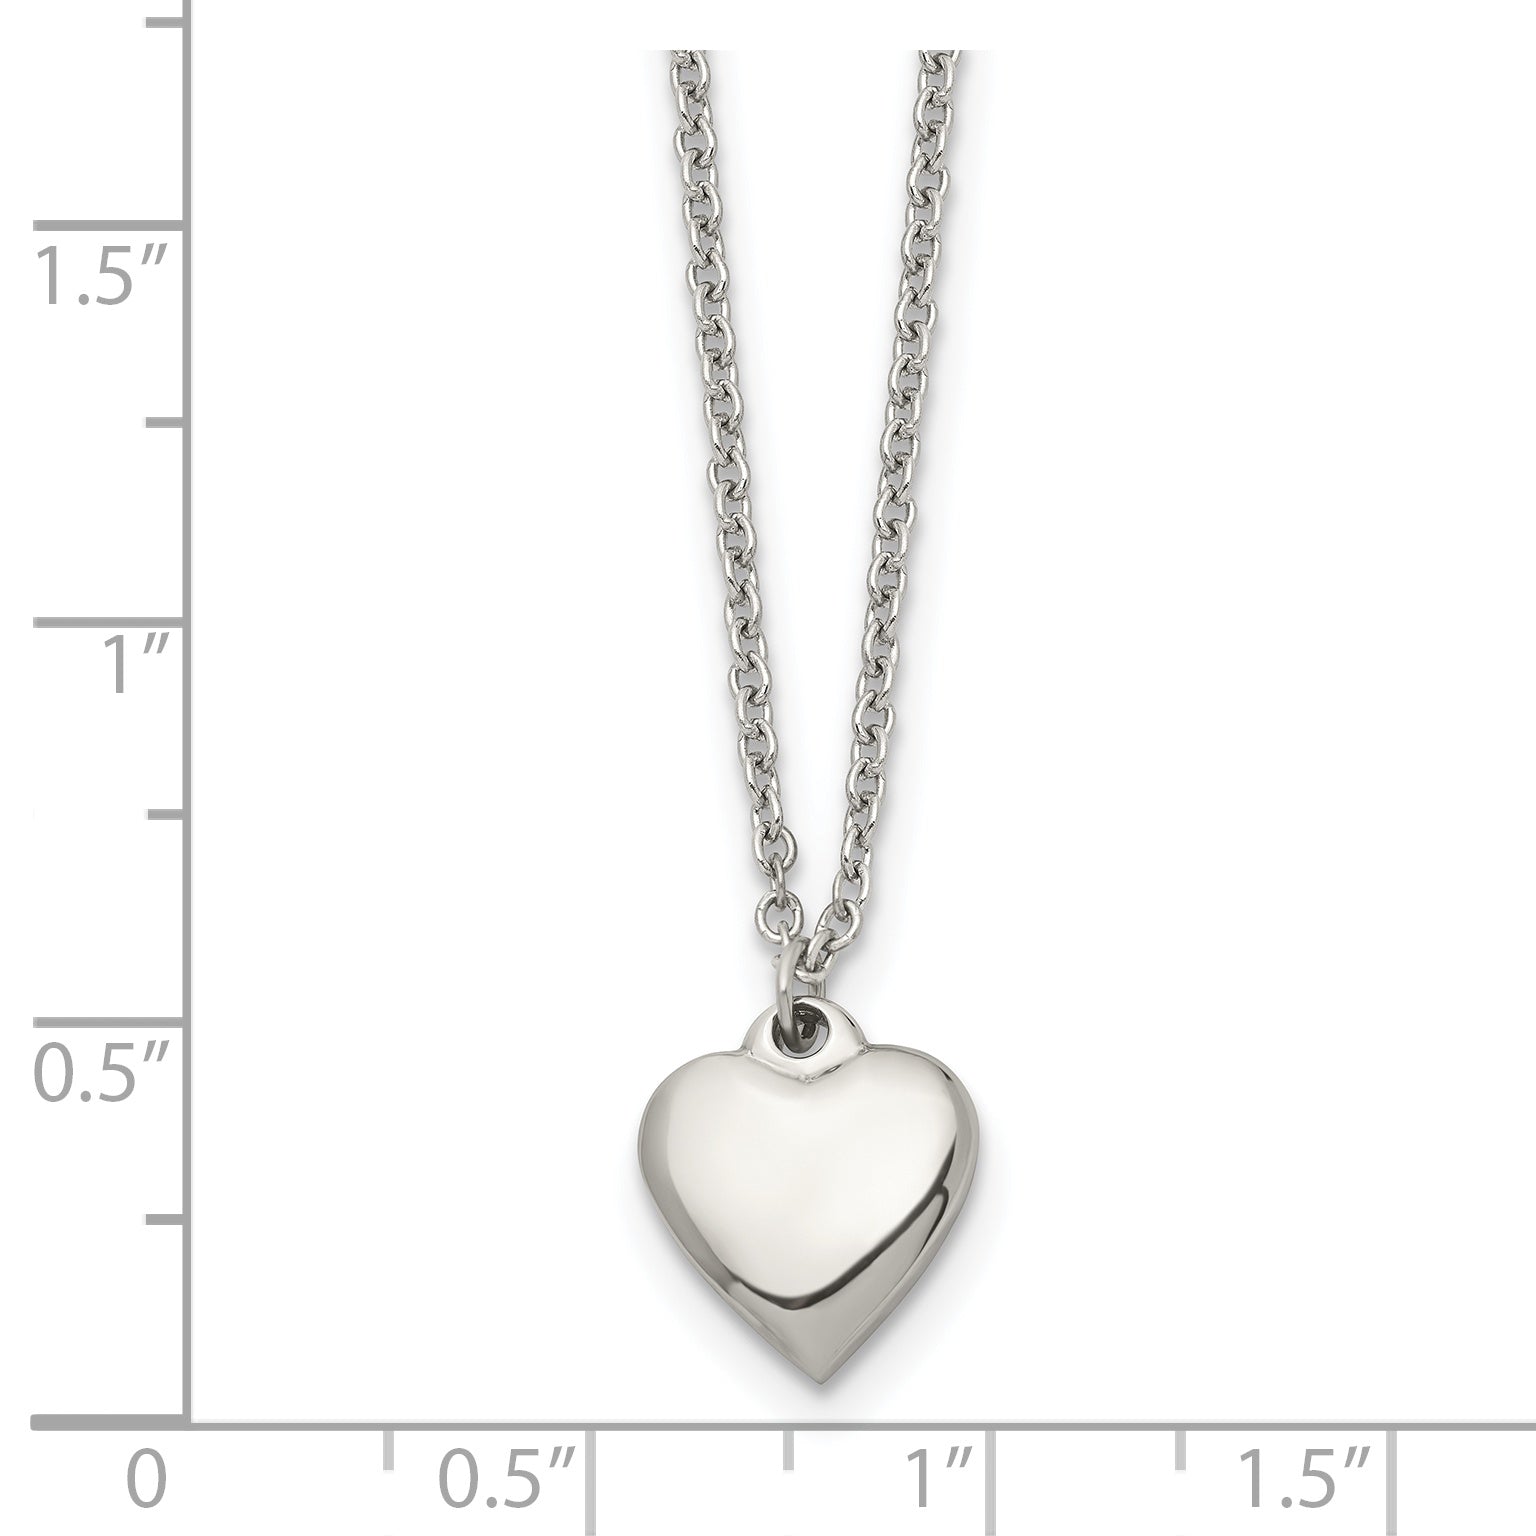 Chisel Stainless Steel Polished Heart on a 16.25 inch Cable Chain with a 1.5 inch Extension Necklace